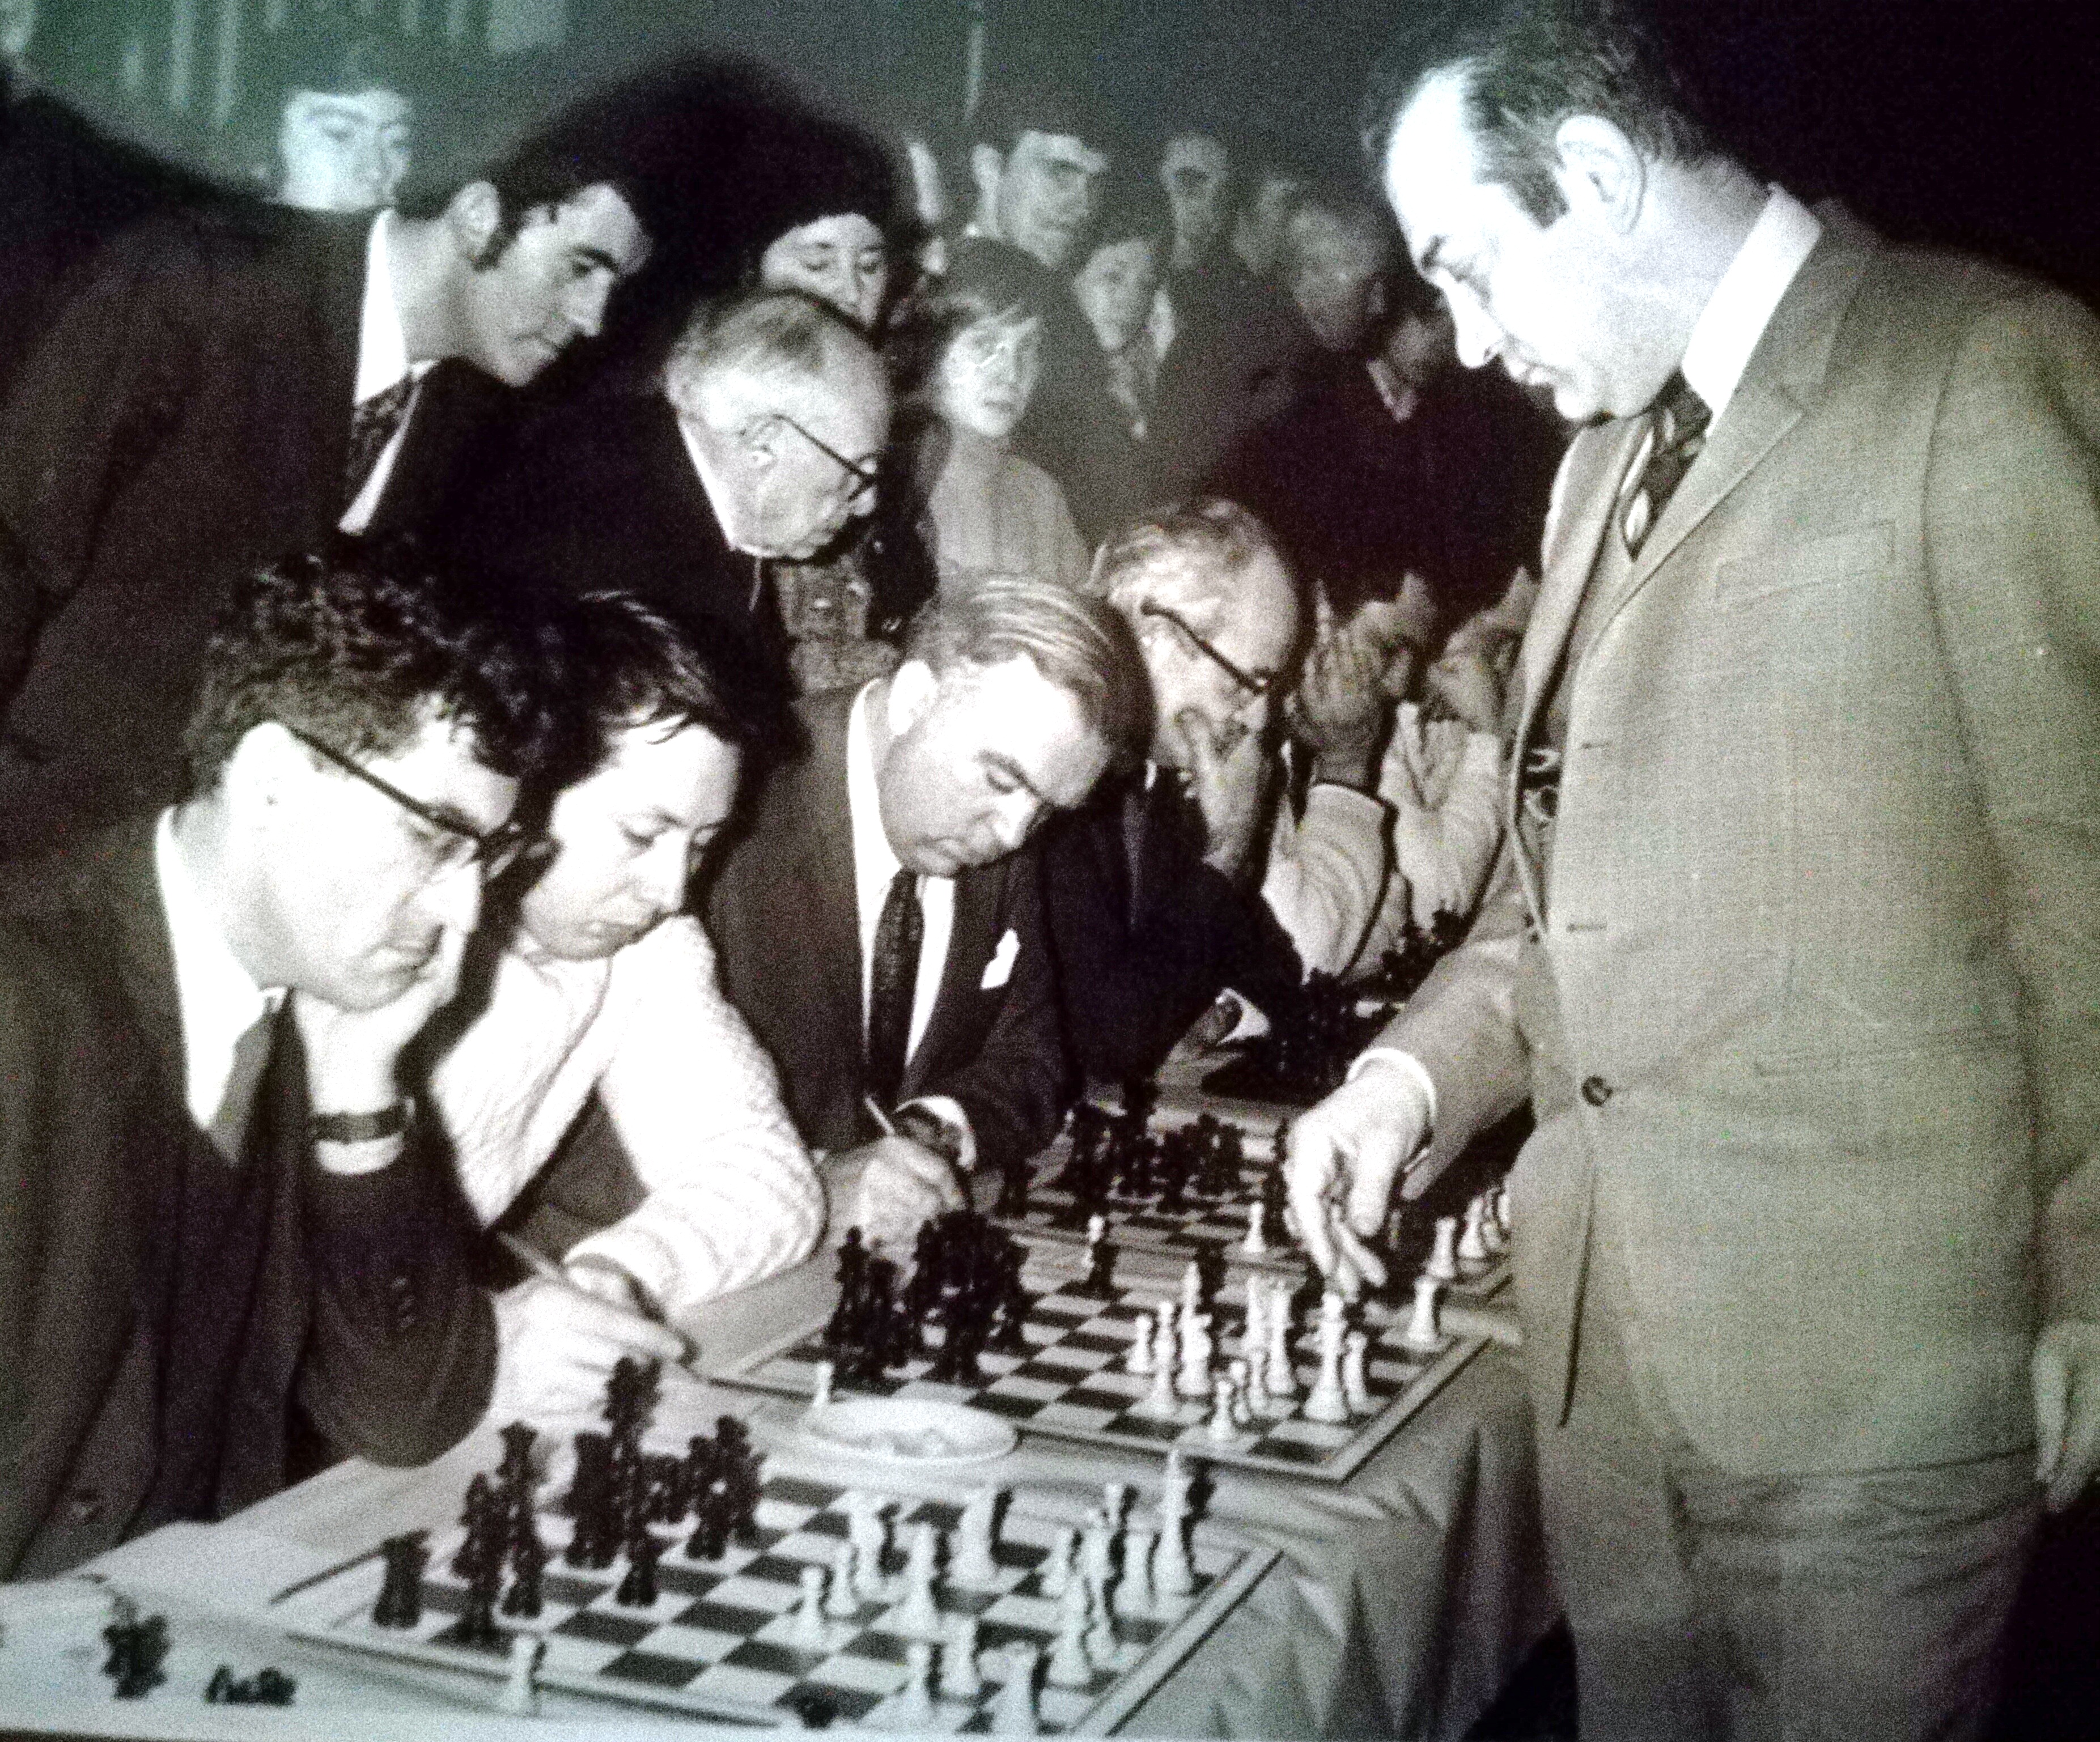 Maurice Bell and Roger Simpson playing Viktor Korchnoi in 1972 Simul